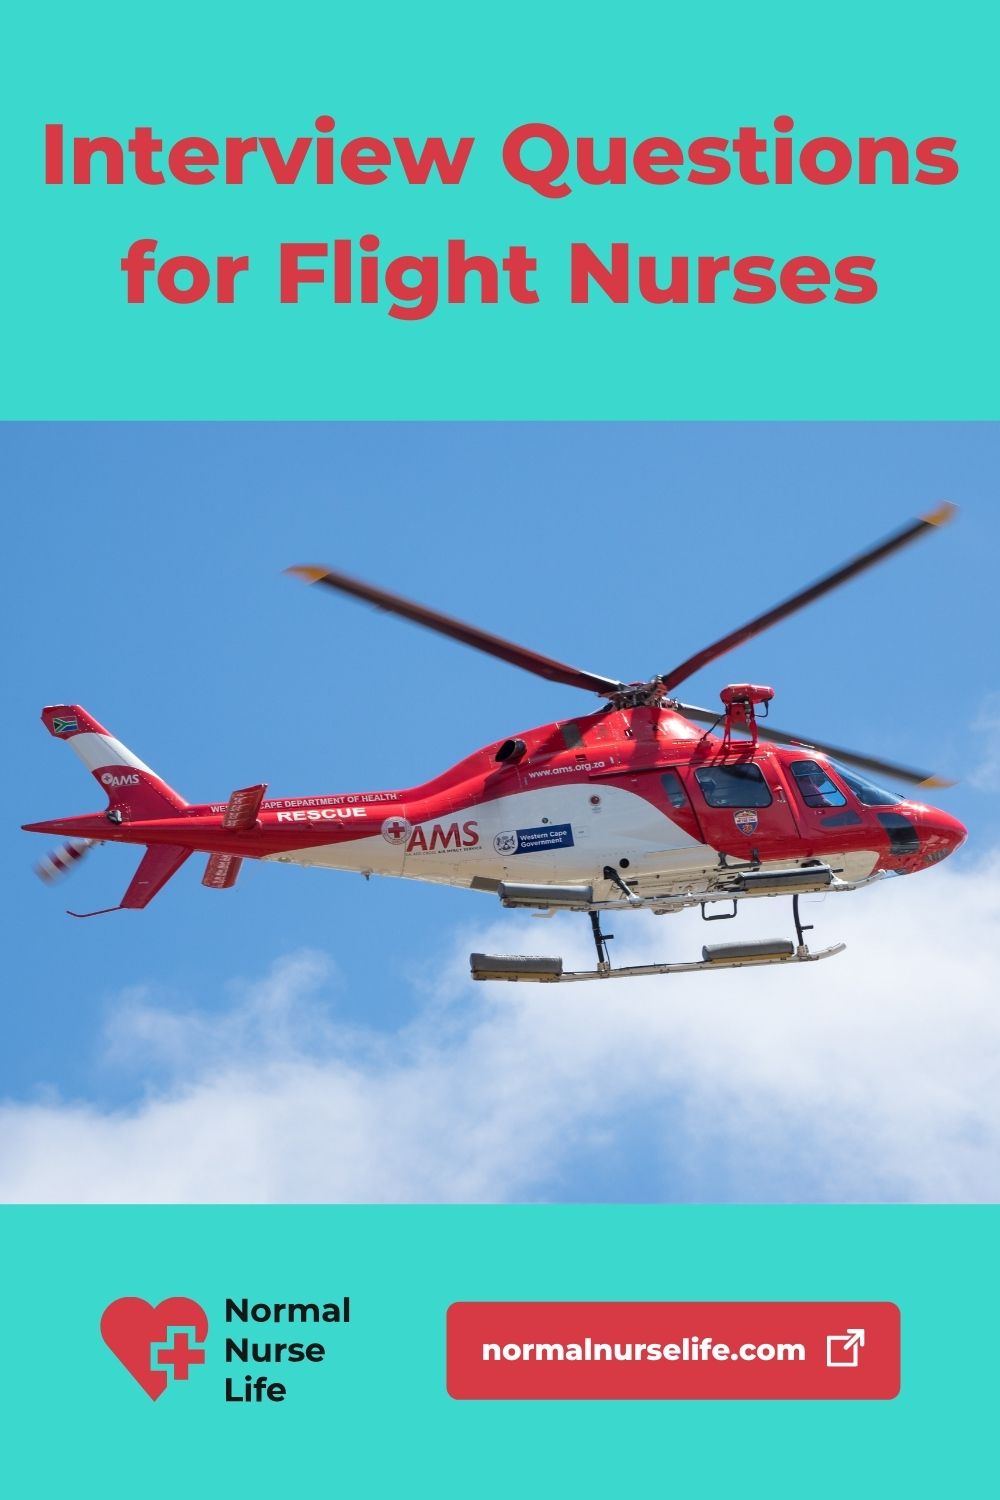 Flight nurse interview questions and answers